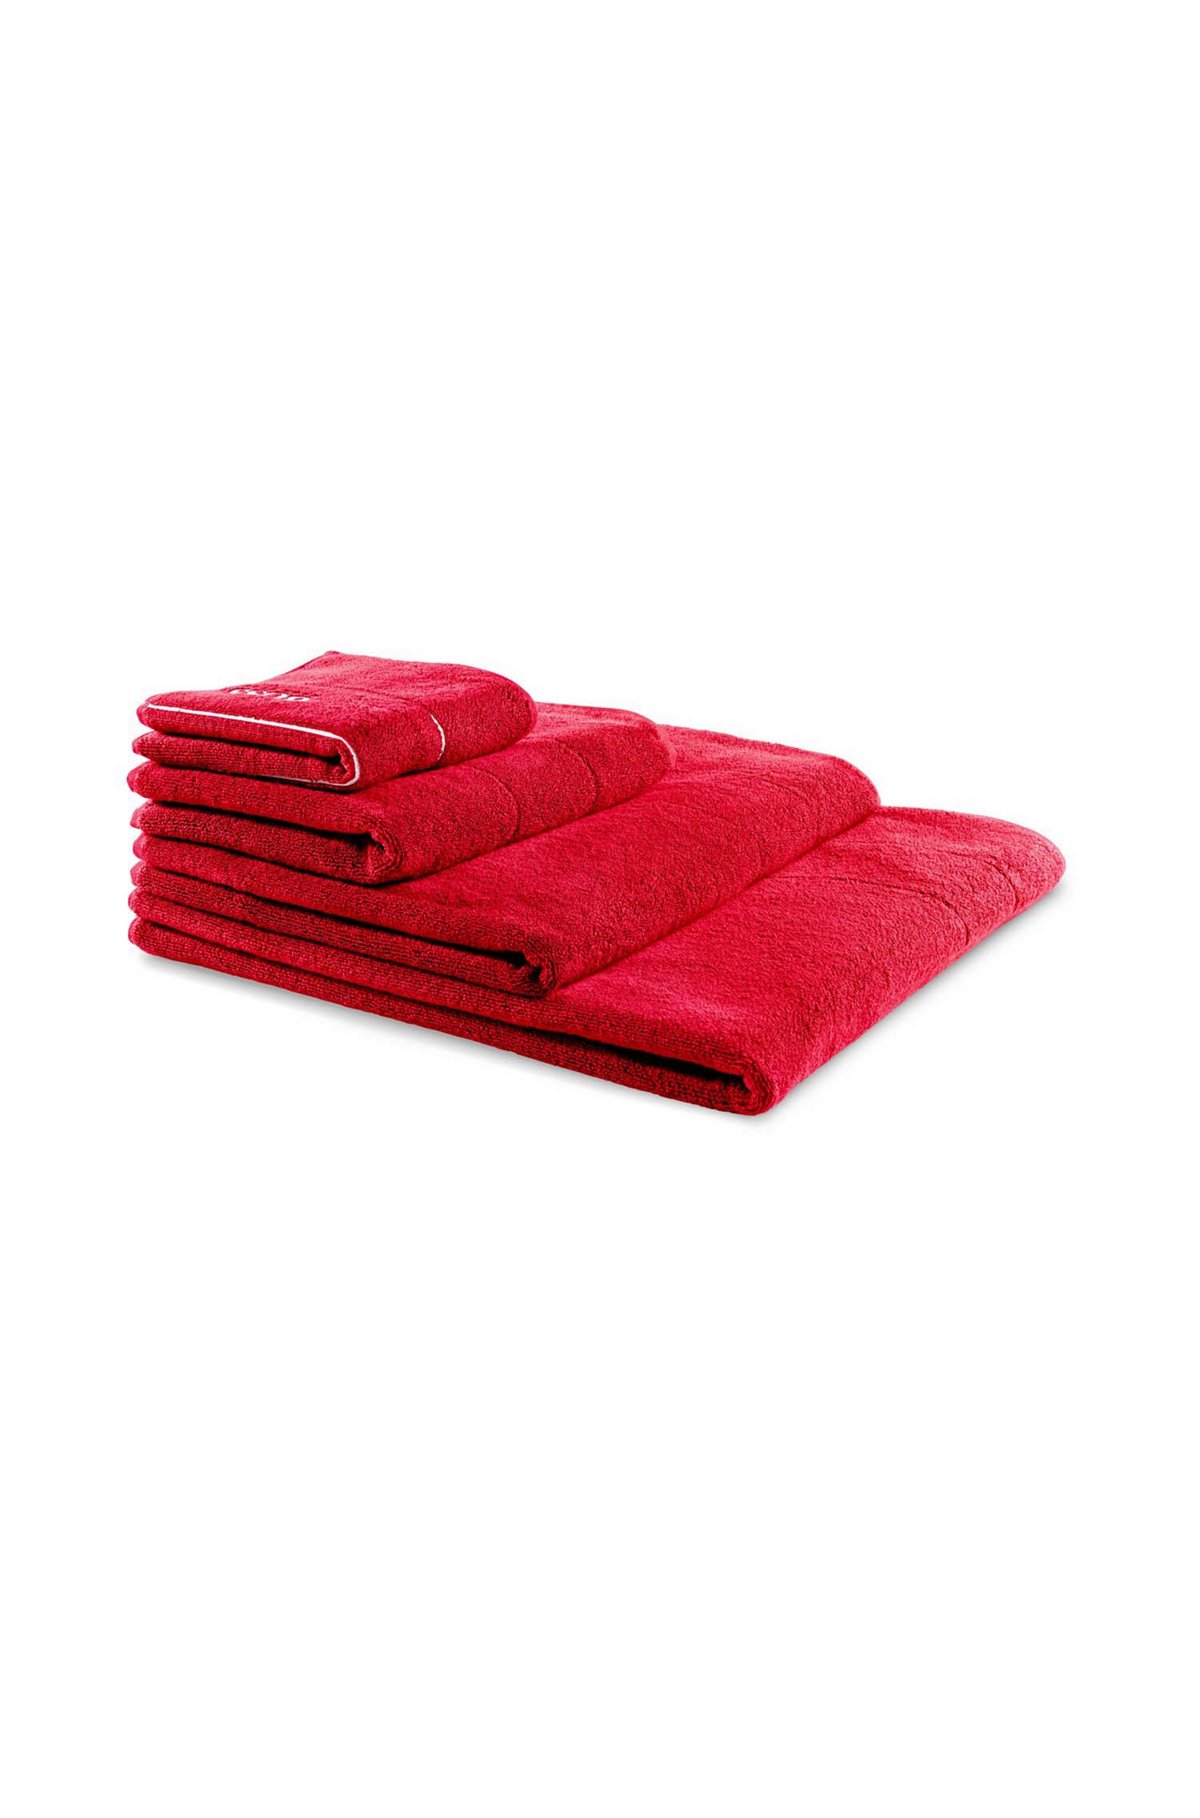 Cotton bath towel with white logo embroidery, Red